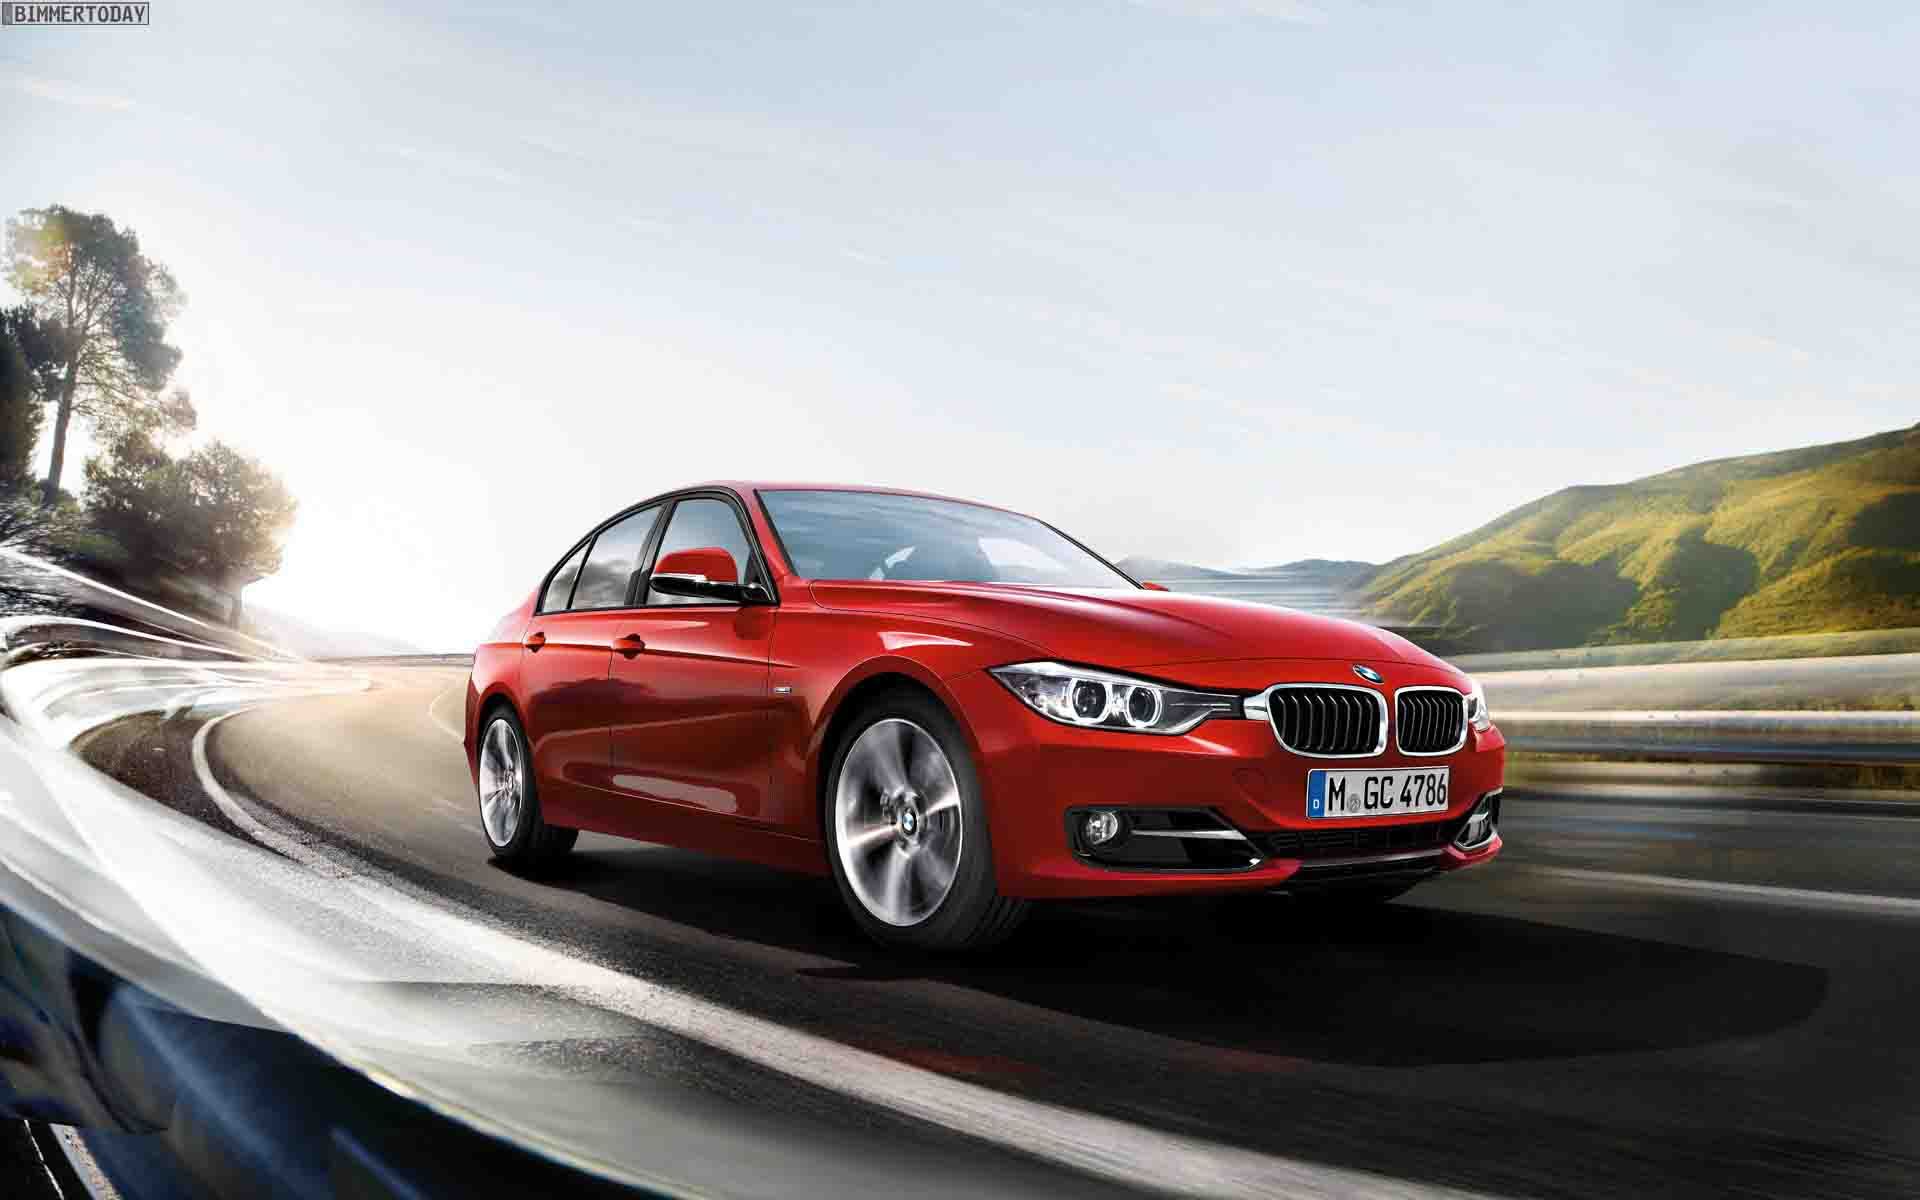 bmw cars wallpapers hd free download,land vehicle,vehicle,car,personal luxury car,bmw